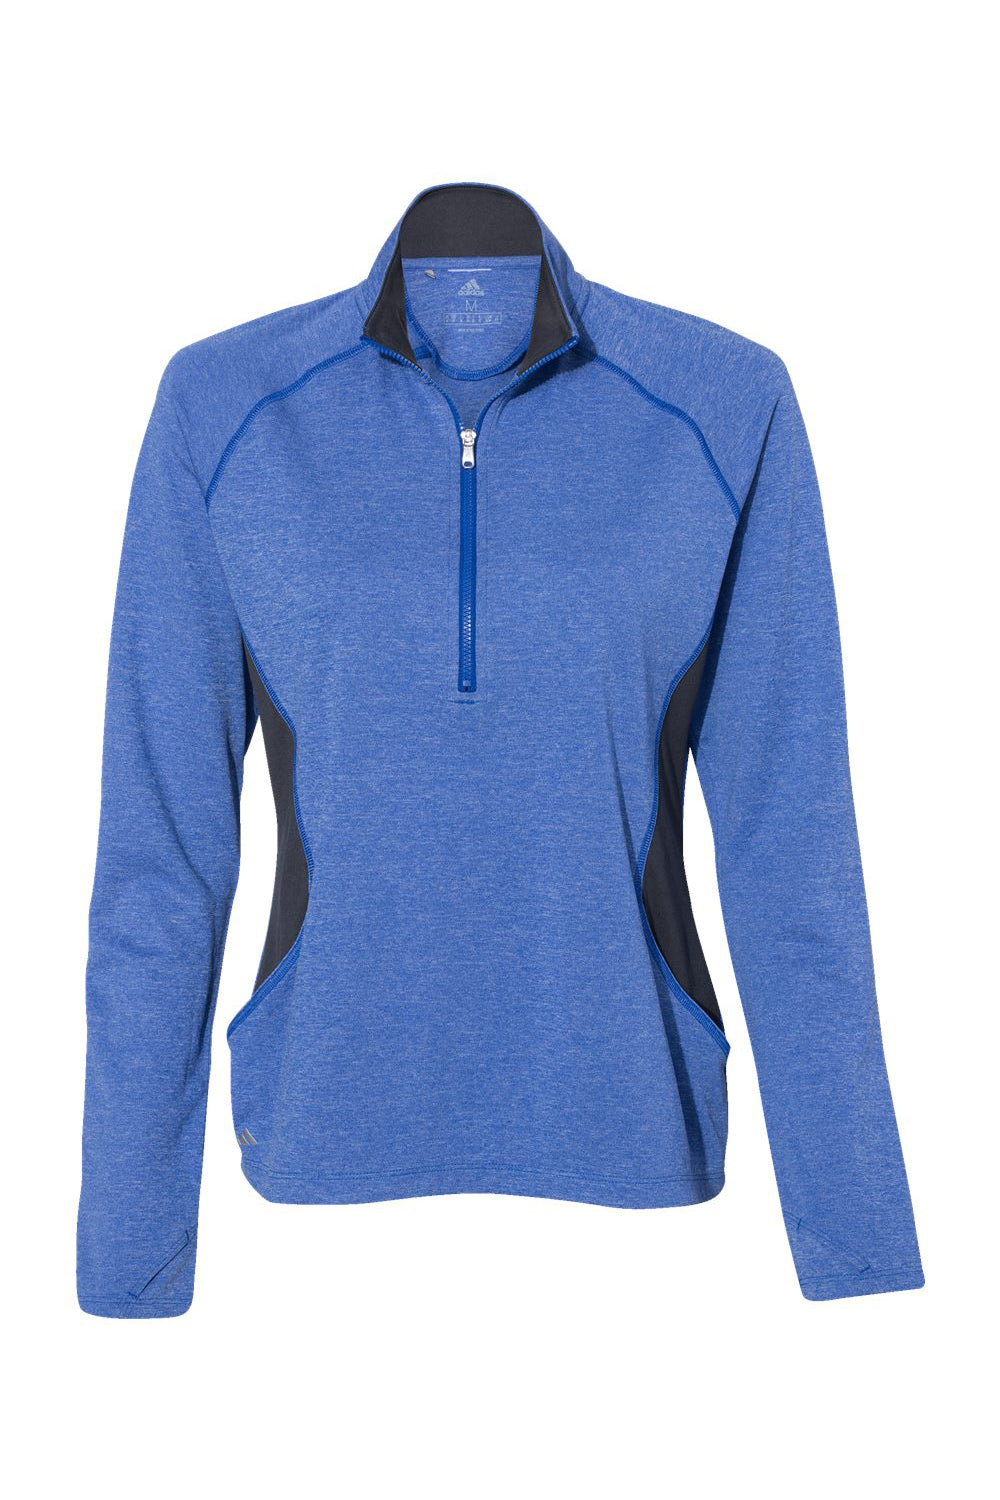 Adidas A281 Womens 1/4 Zip Pullover Heather Collegiate Royal Blue/Carbon Grey Flat Front